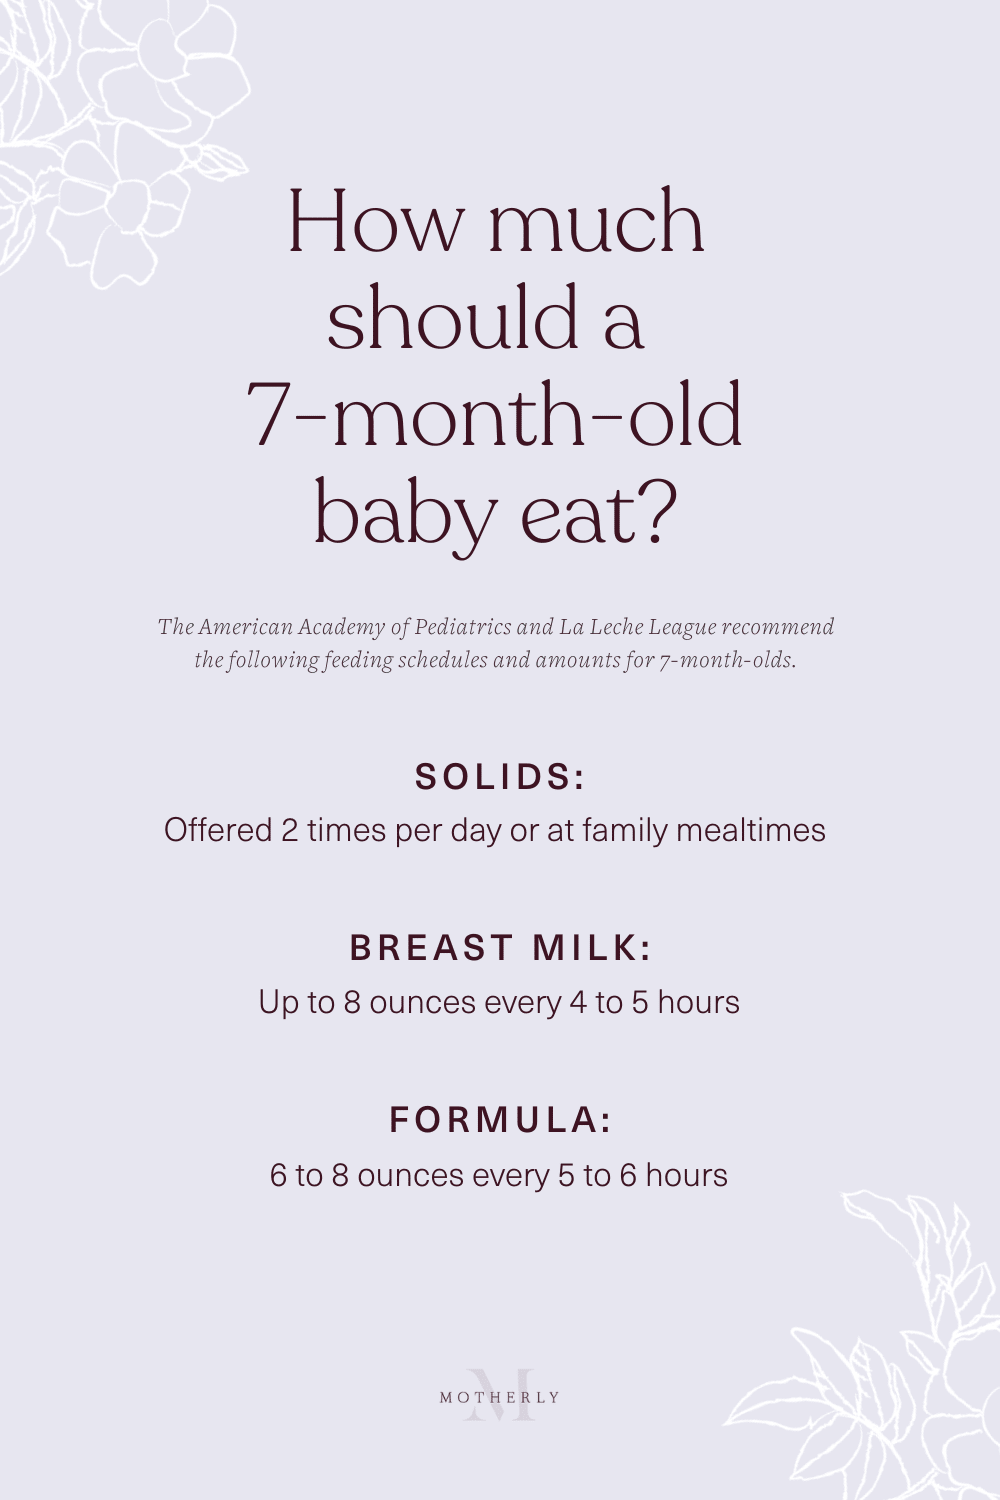 https://www.mother.ly/wp-content/uploads/2021/09/7-month-old-baby-feeding-guide-printable.png